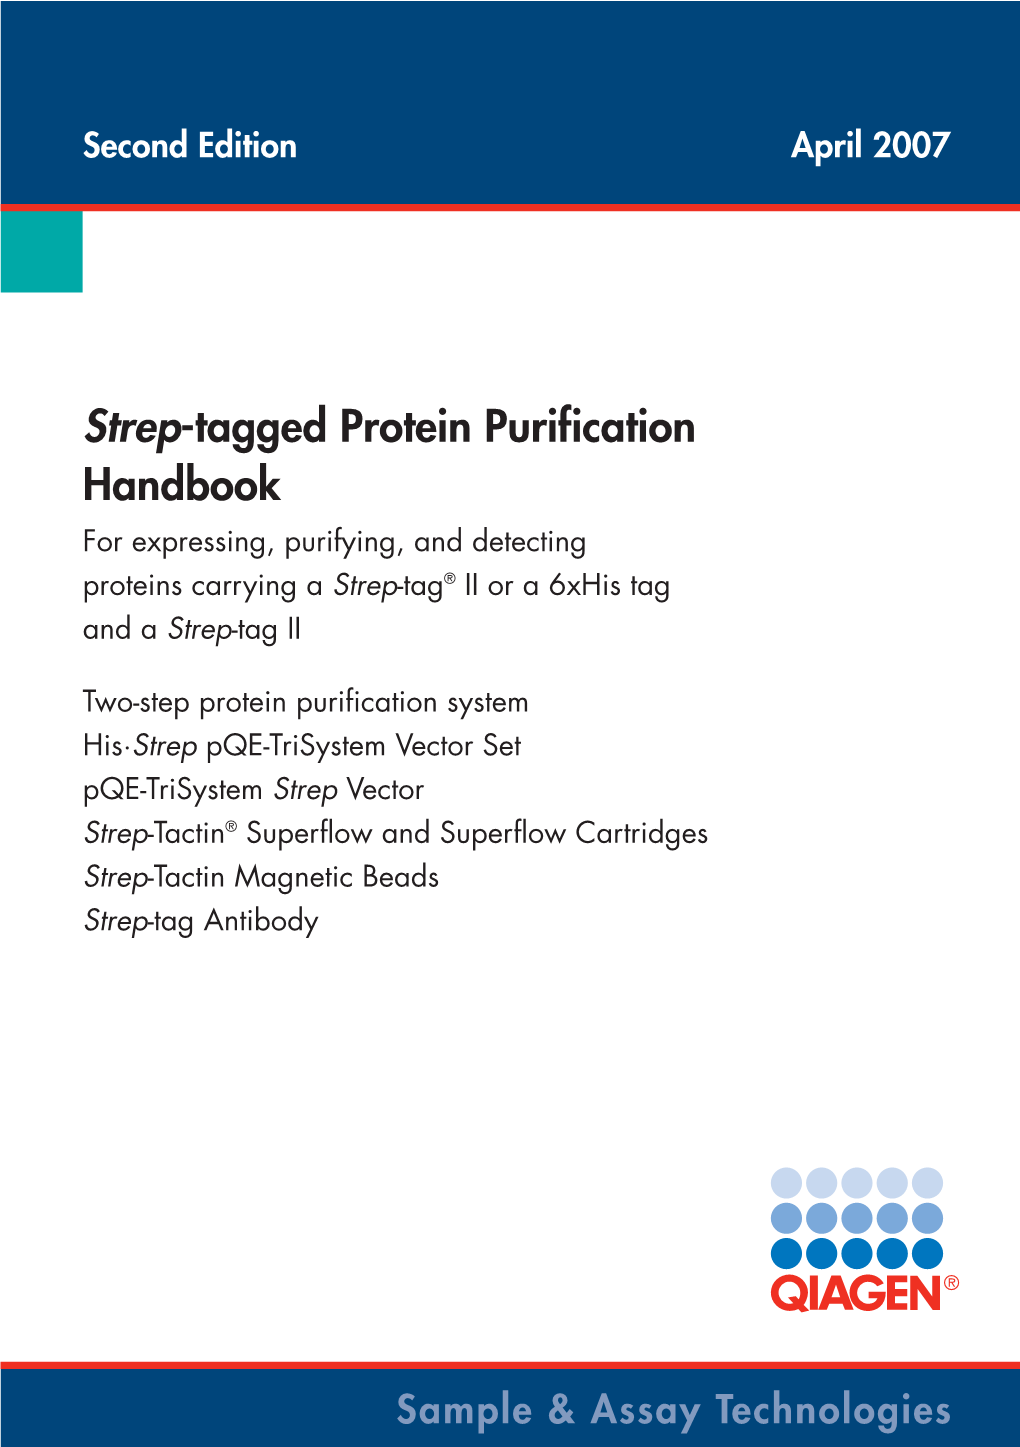 Strep-Tagged Protein Purification Handbook for Expressing, Purifying, and Detecting Proteins Carrying a Strep-Tag® II Or a 6Xhis Tag and a Strep-Tag II